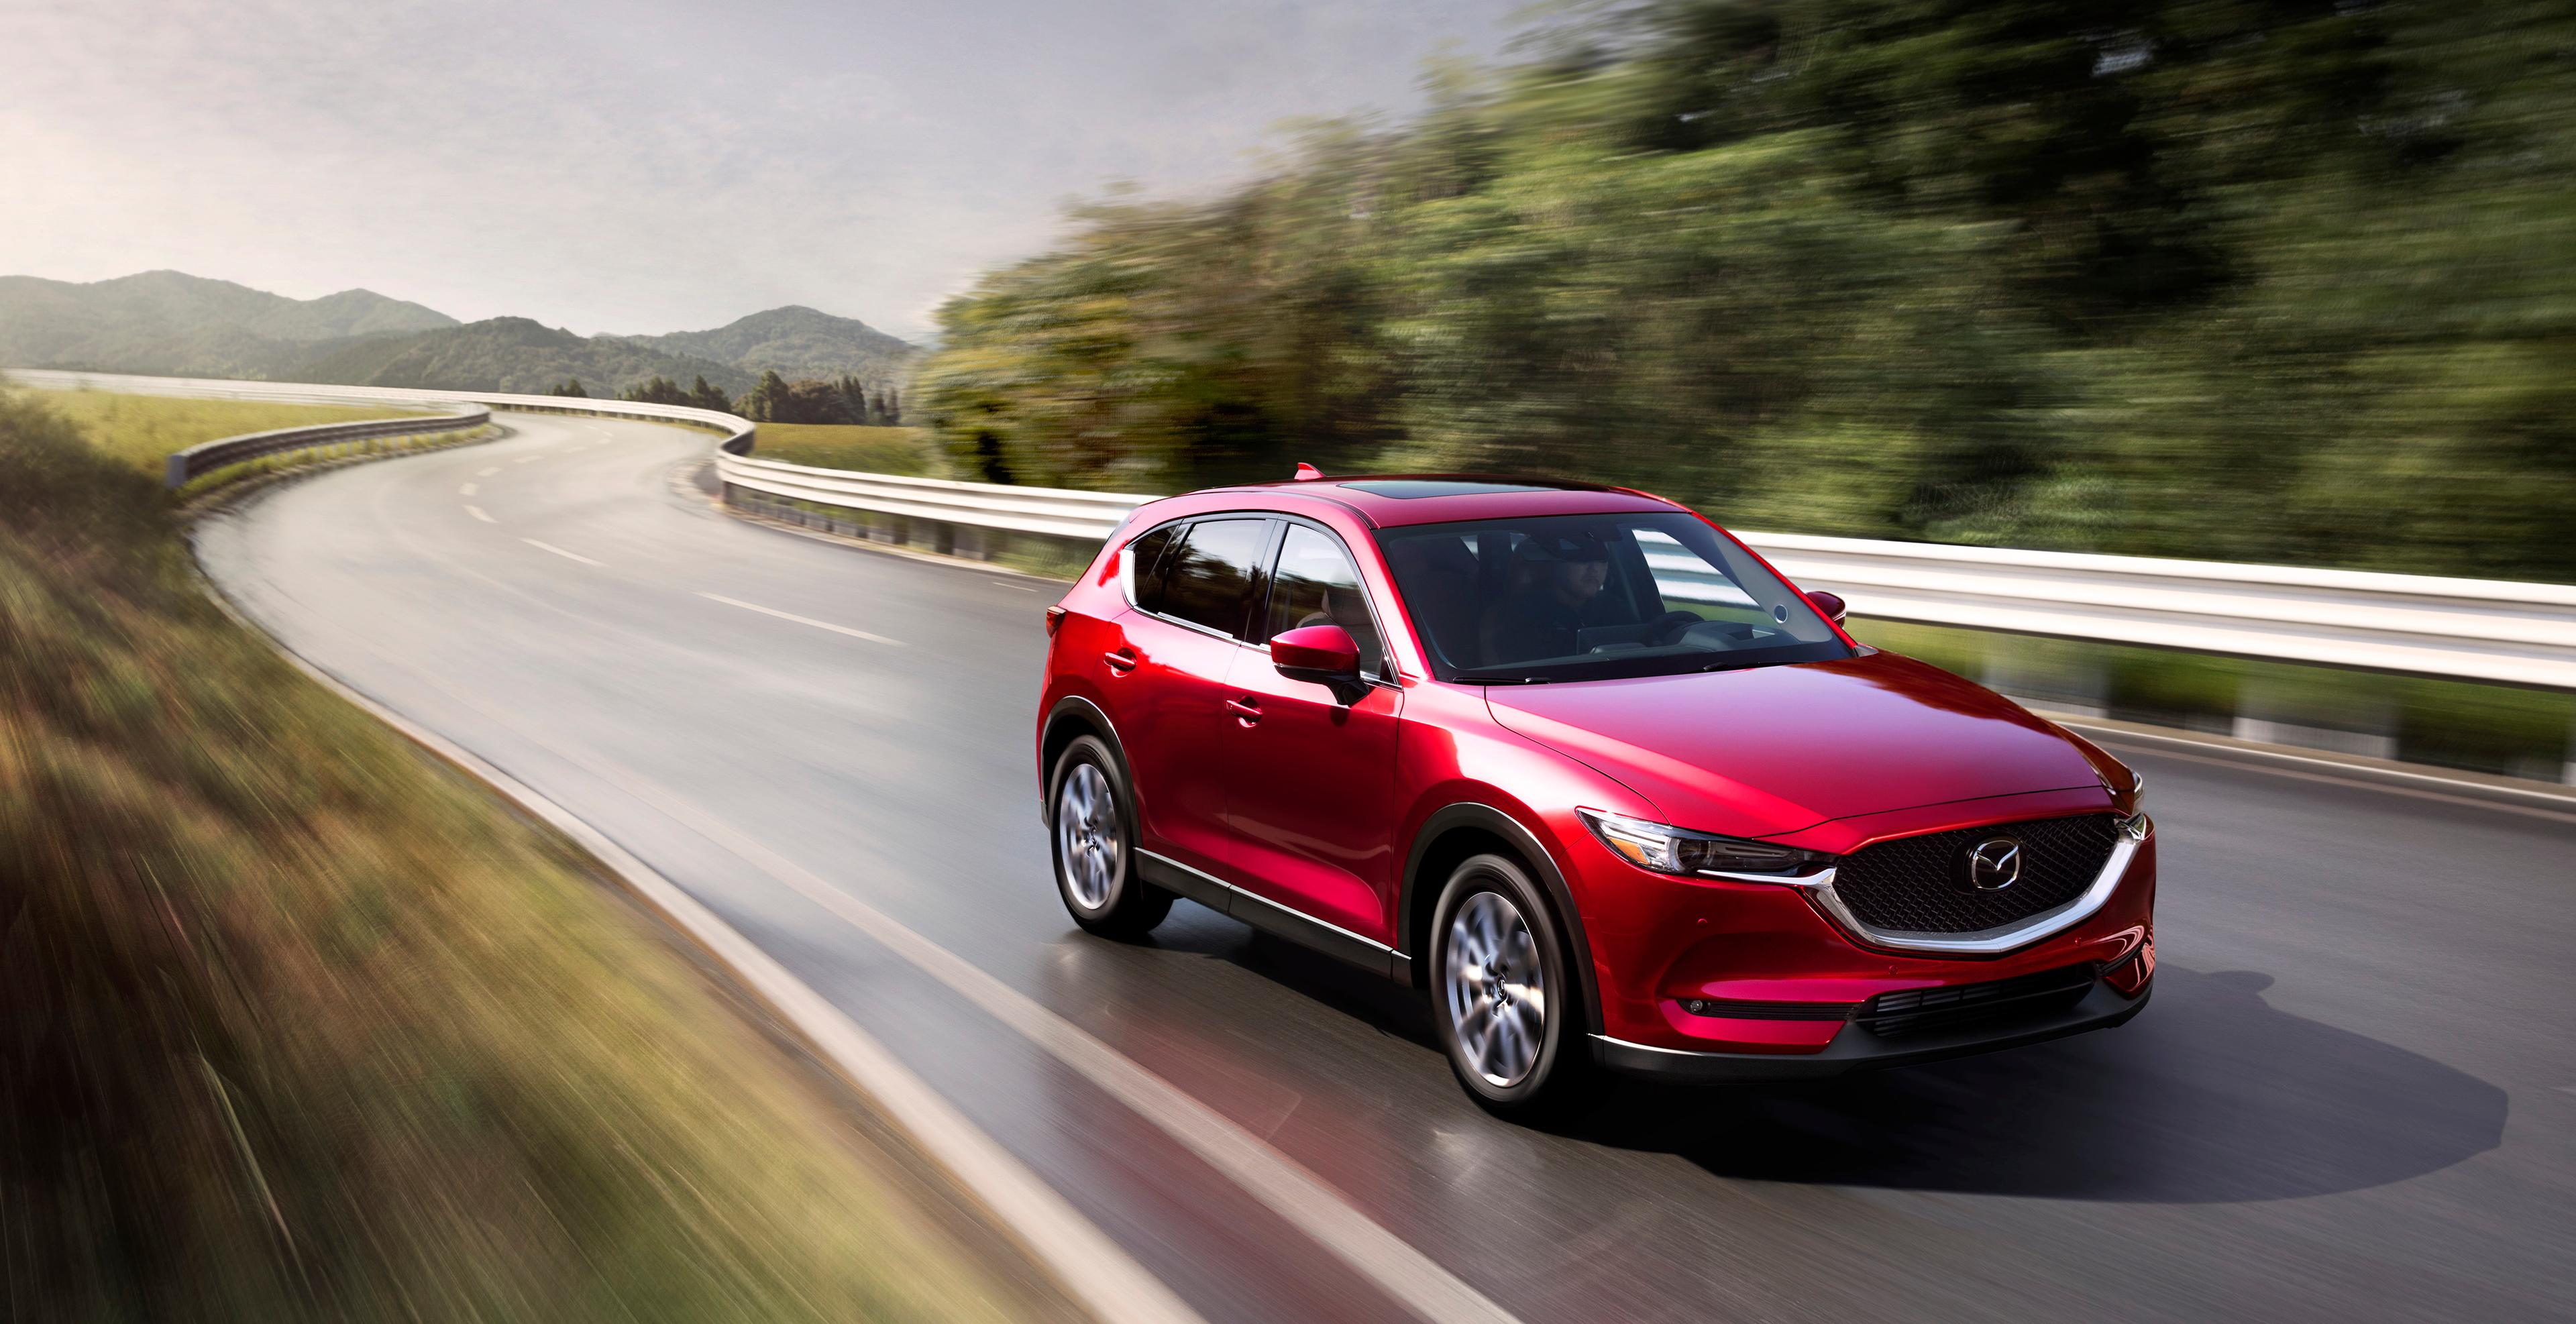 The CX-5 is Mazda’s most popular model by far.